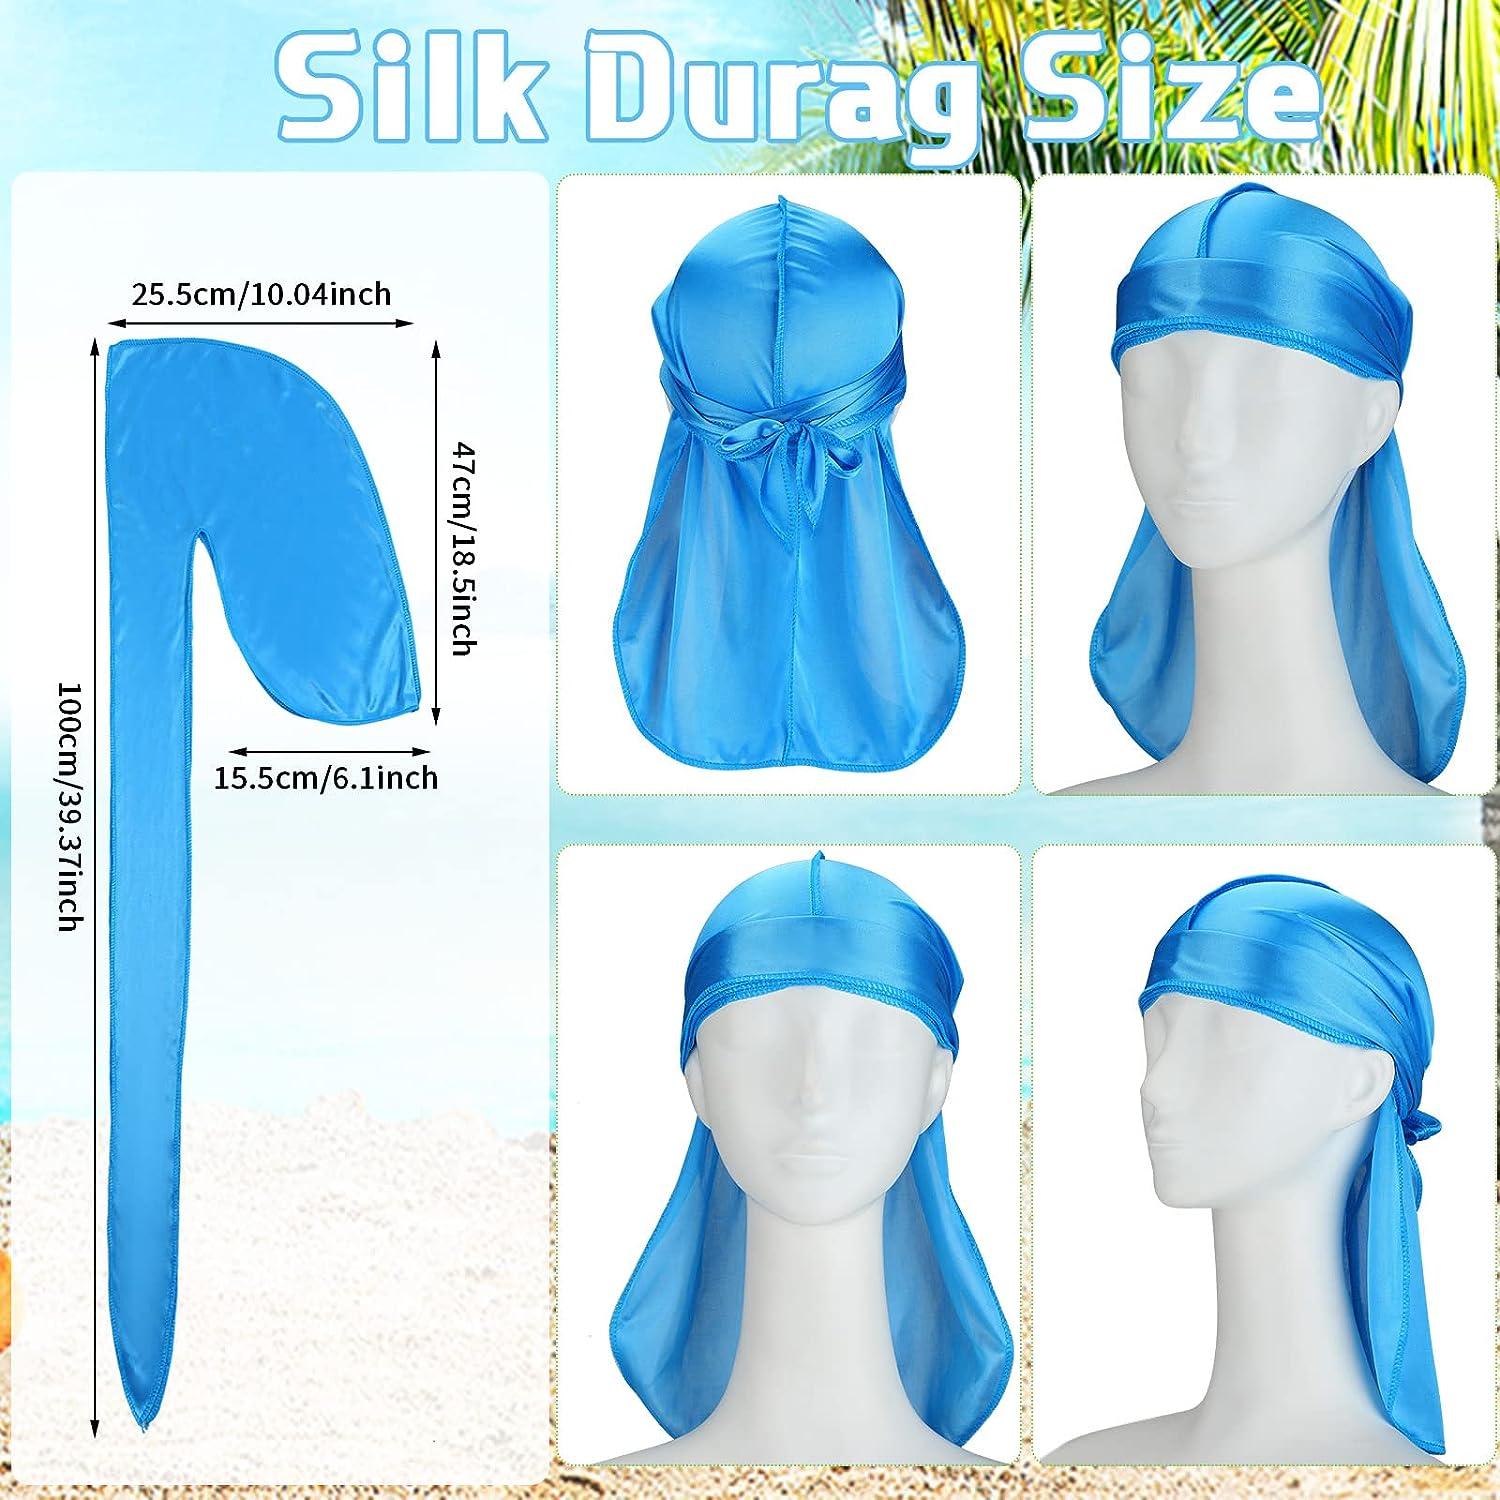  54 Pieces Silk Durags for Men Women 18 Colors Durags Wave Cap  Satin Durags for 360 Waves Breathable Doo Rags with Wide Strap Durags for  Hair Waves Running Fitness Cycling Hiking